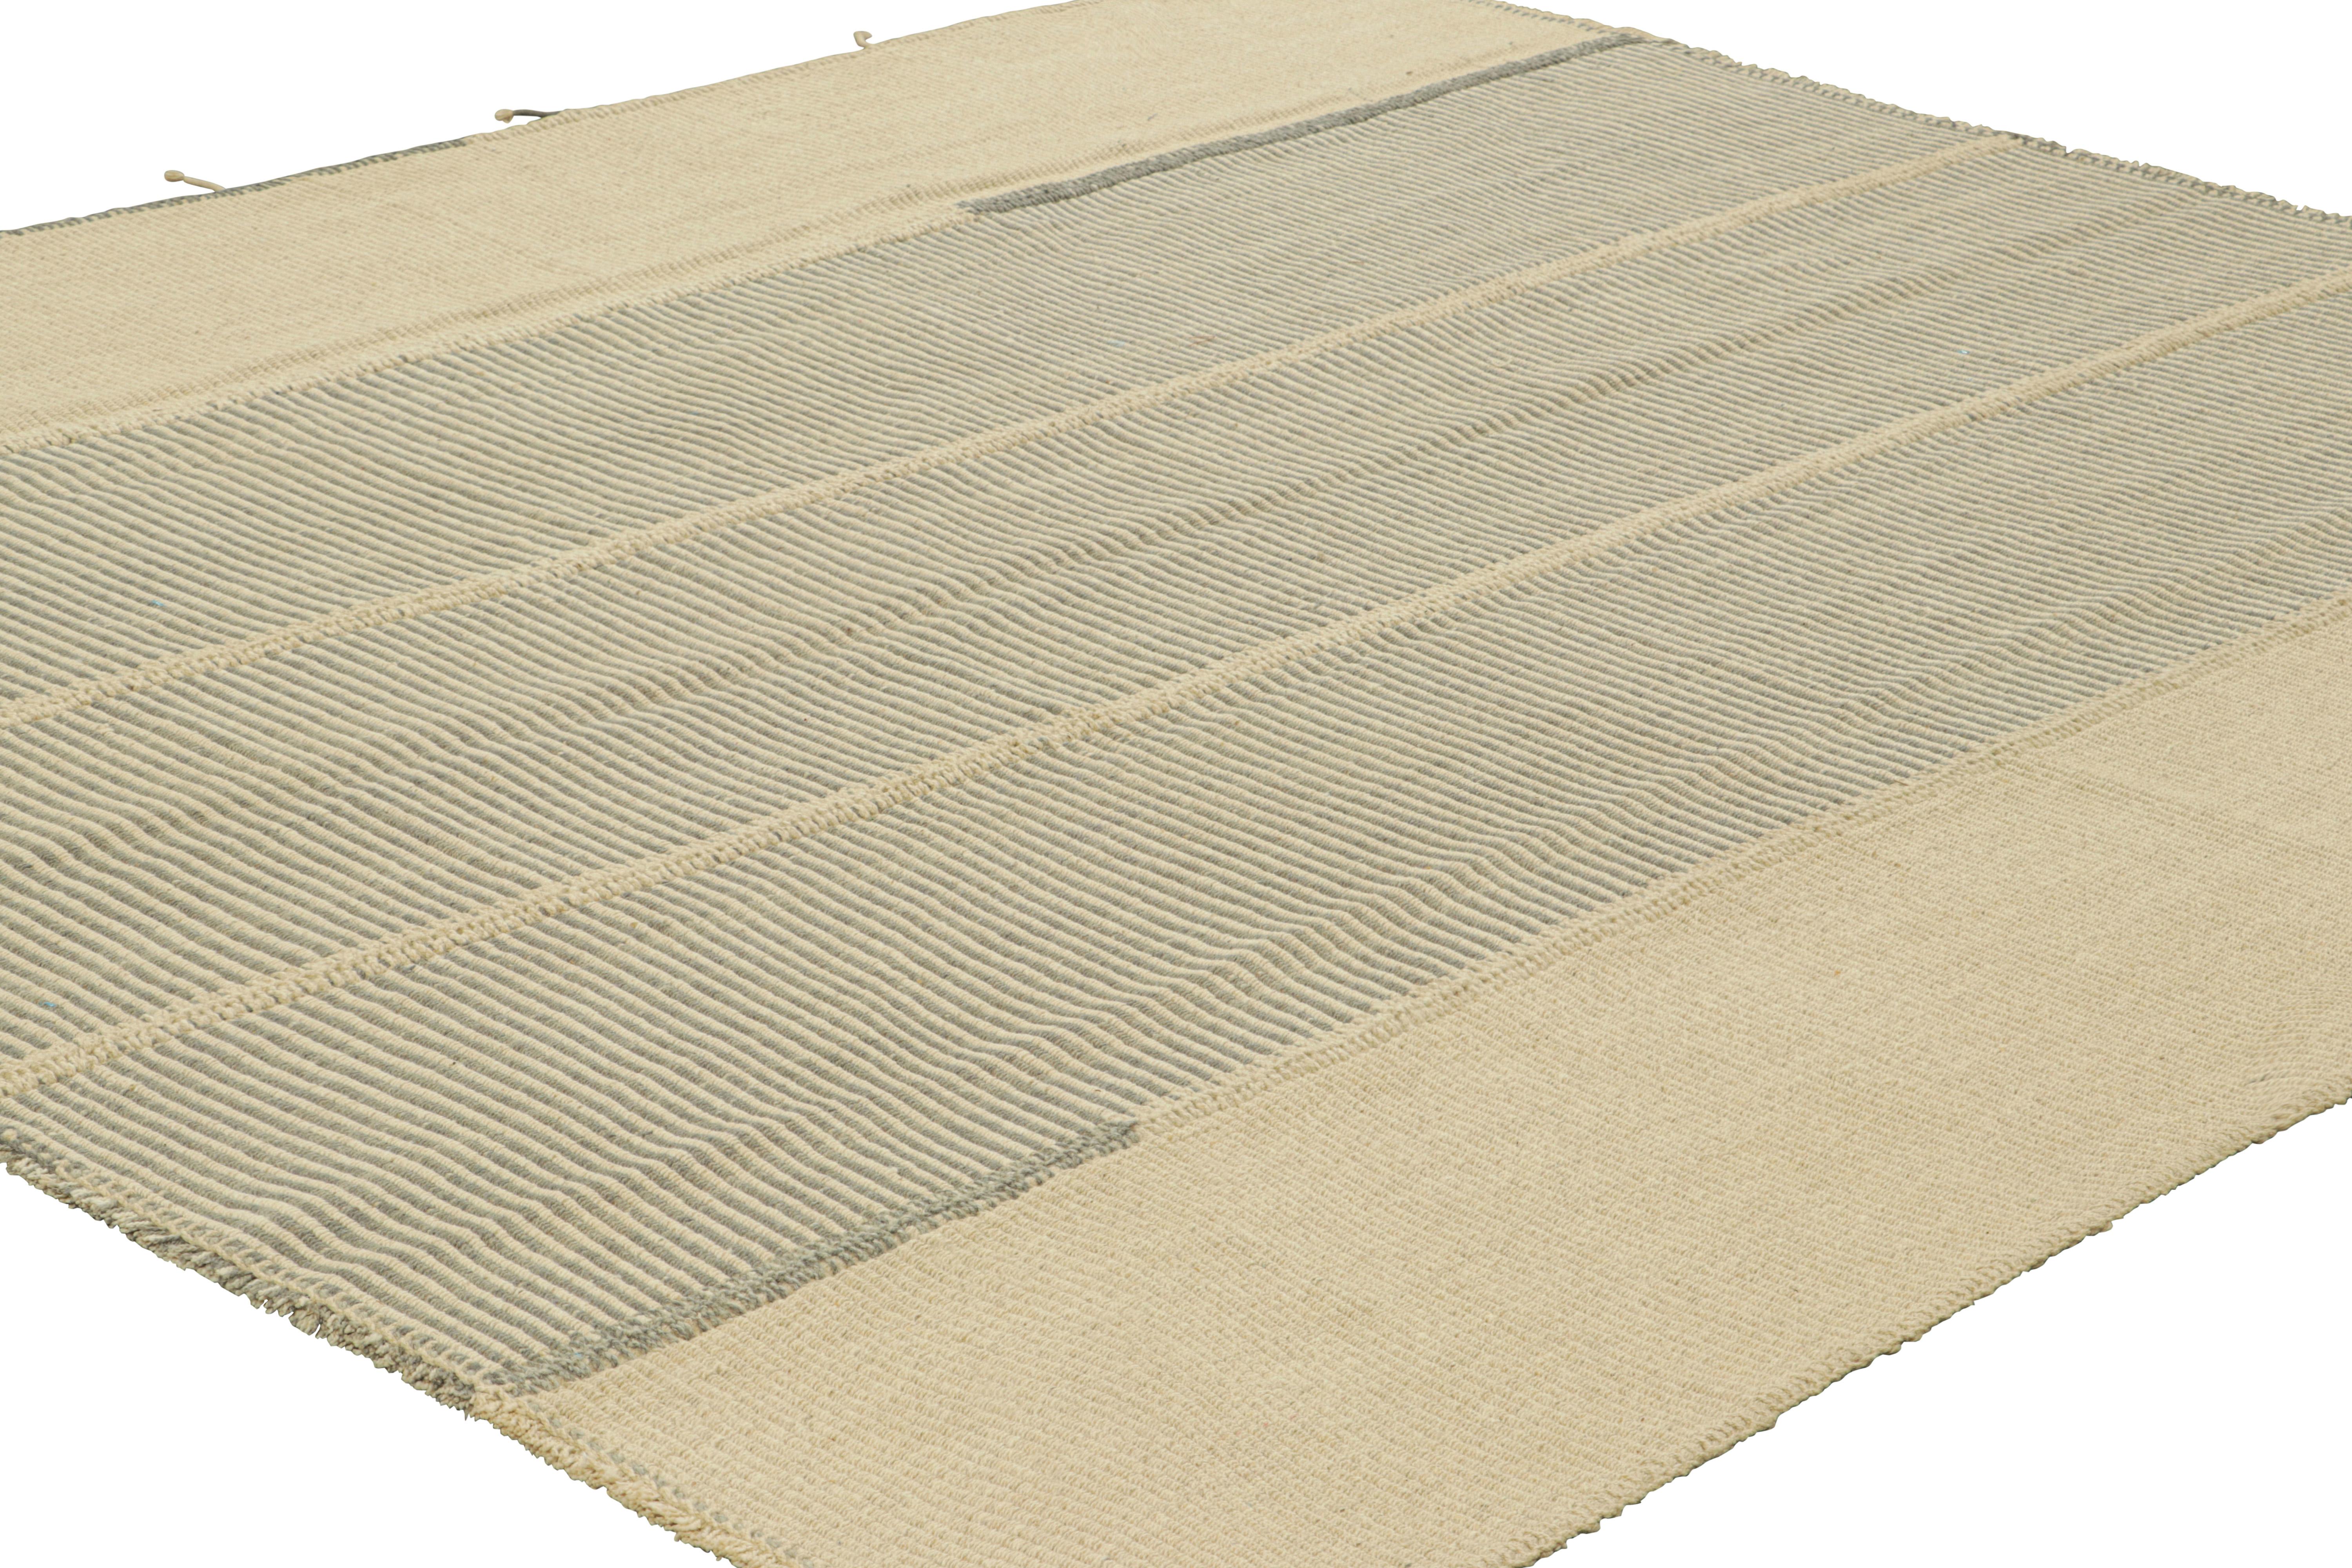 Afghan Rug & Kilim’s Contemporary Kilim in Cream White and Gray Textural Stripes For Sale